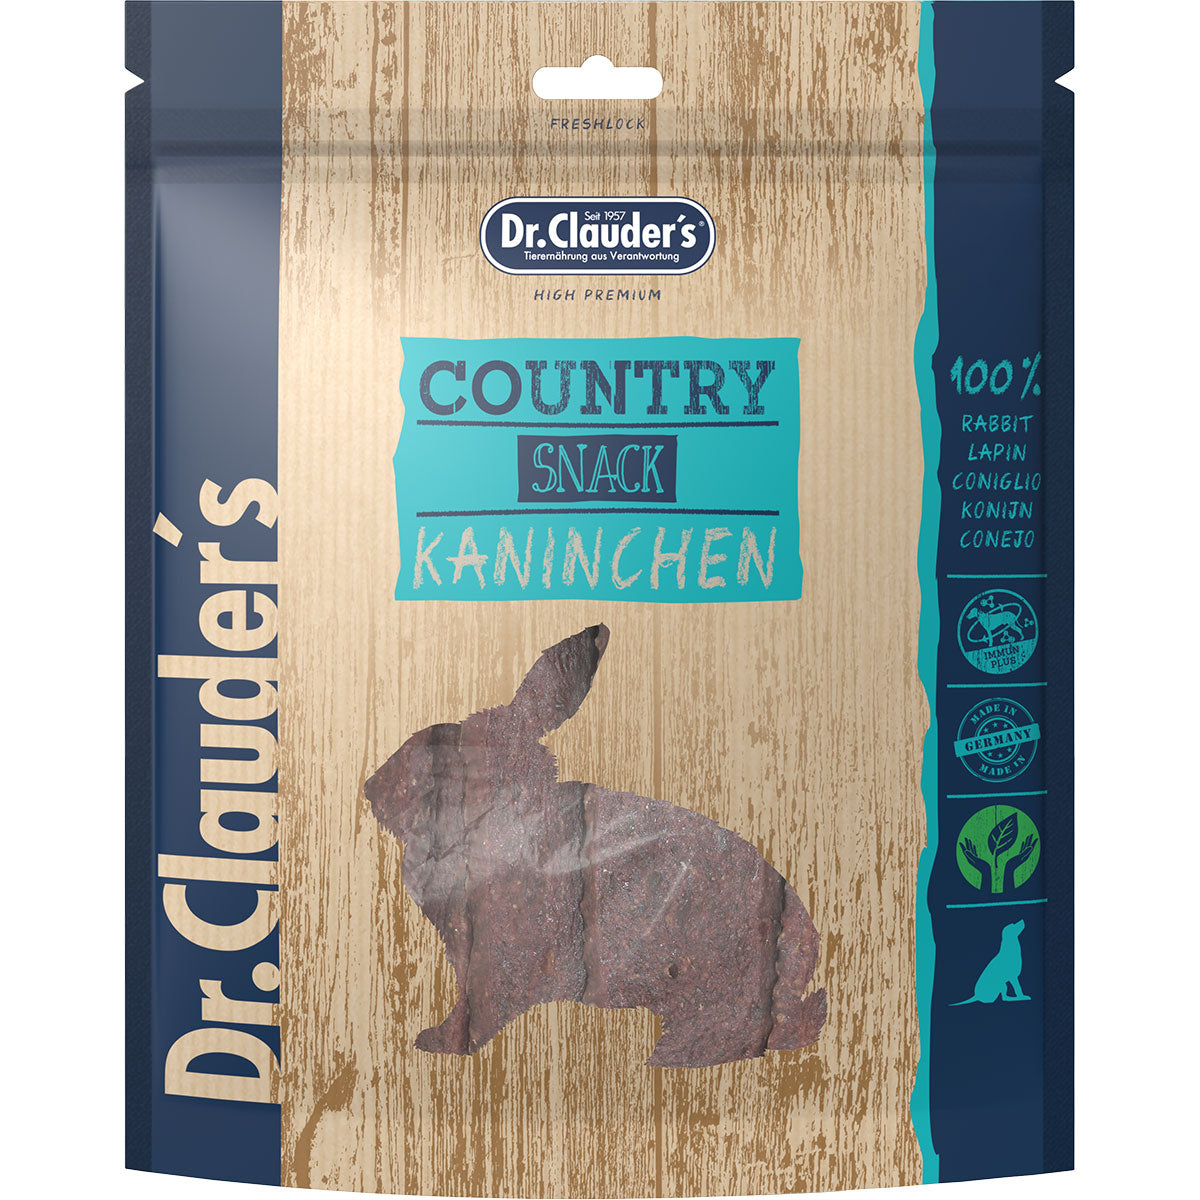 Dr. Clauders Snack Country Kaninchen, 170g